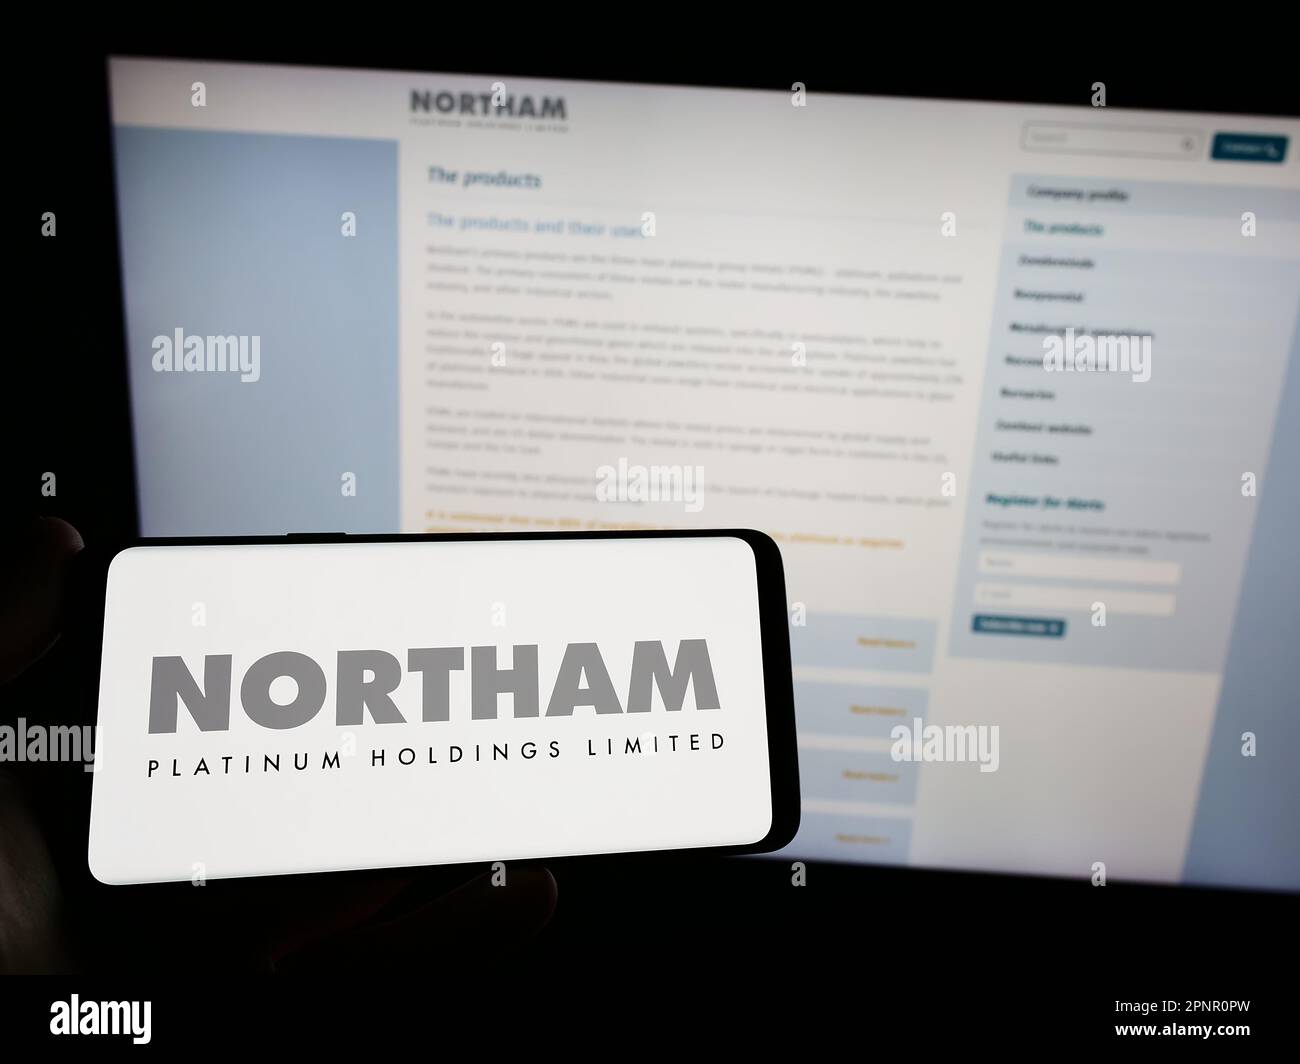 Person holding smartphone with logo of company Northam Platinum Holdings Limited on screen in front of website. Focus on phone display. Stock Photo